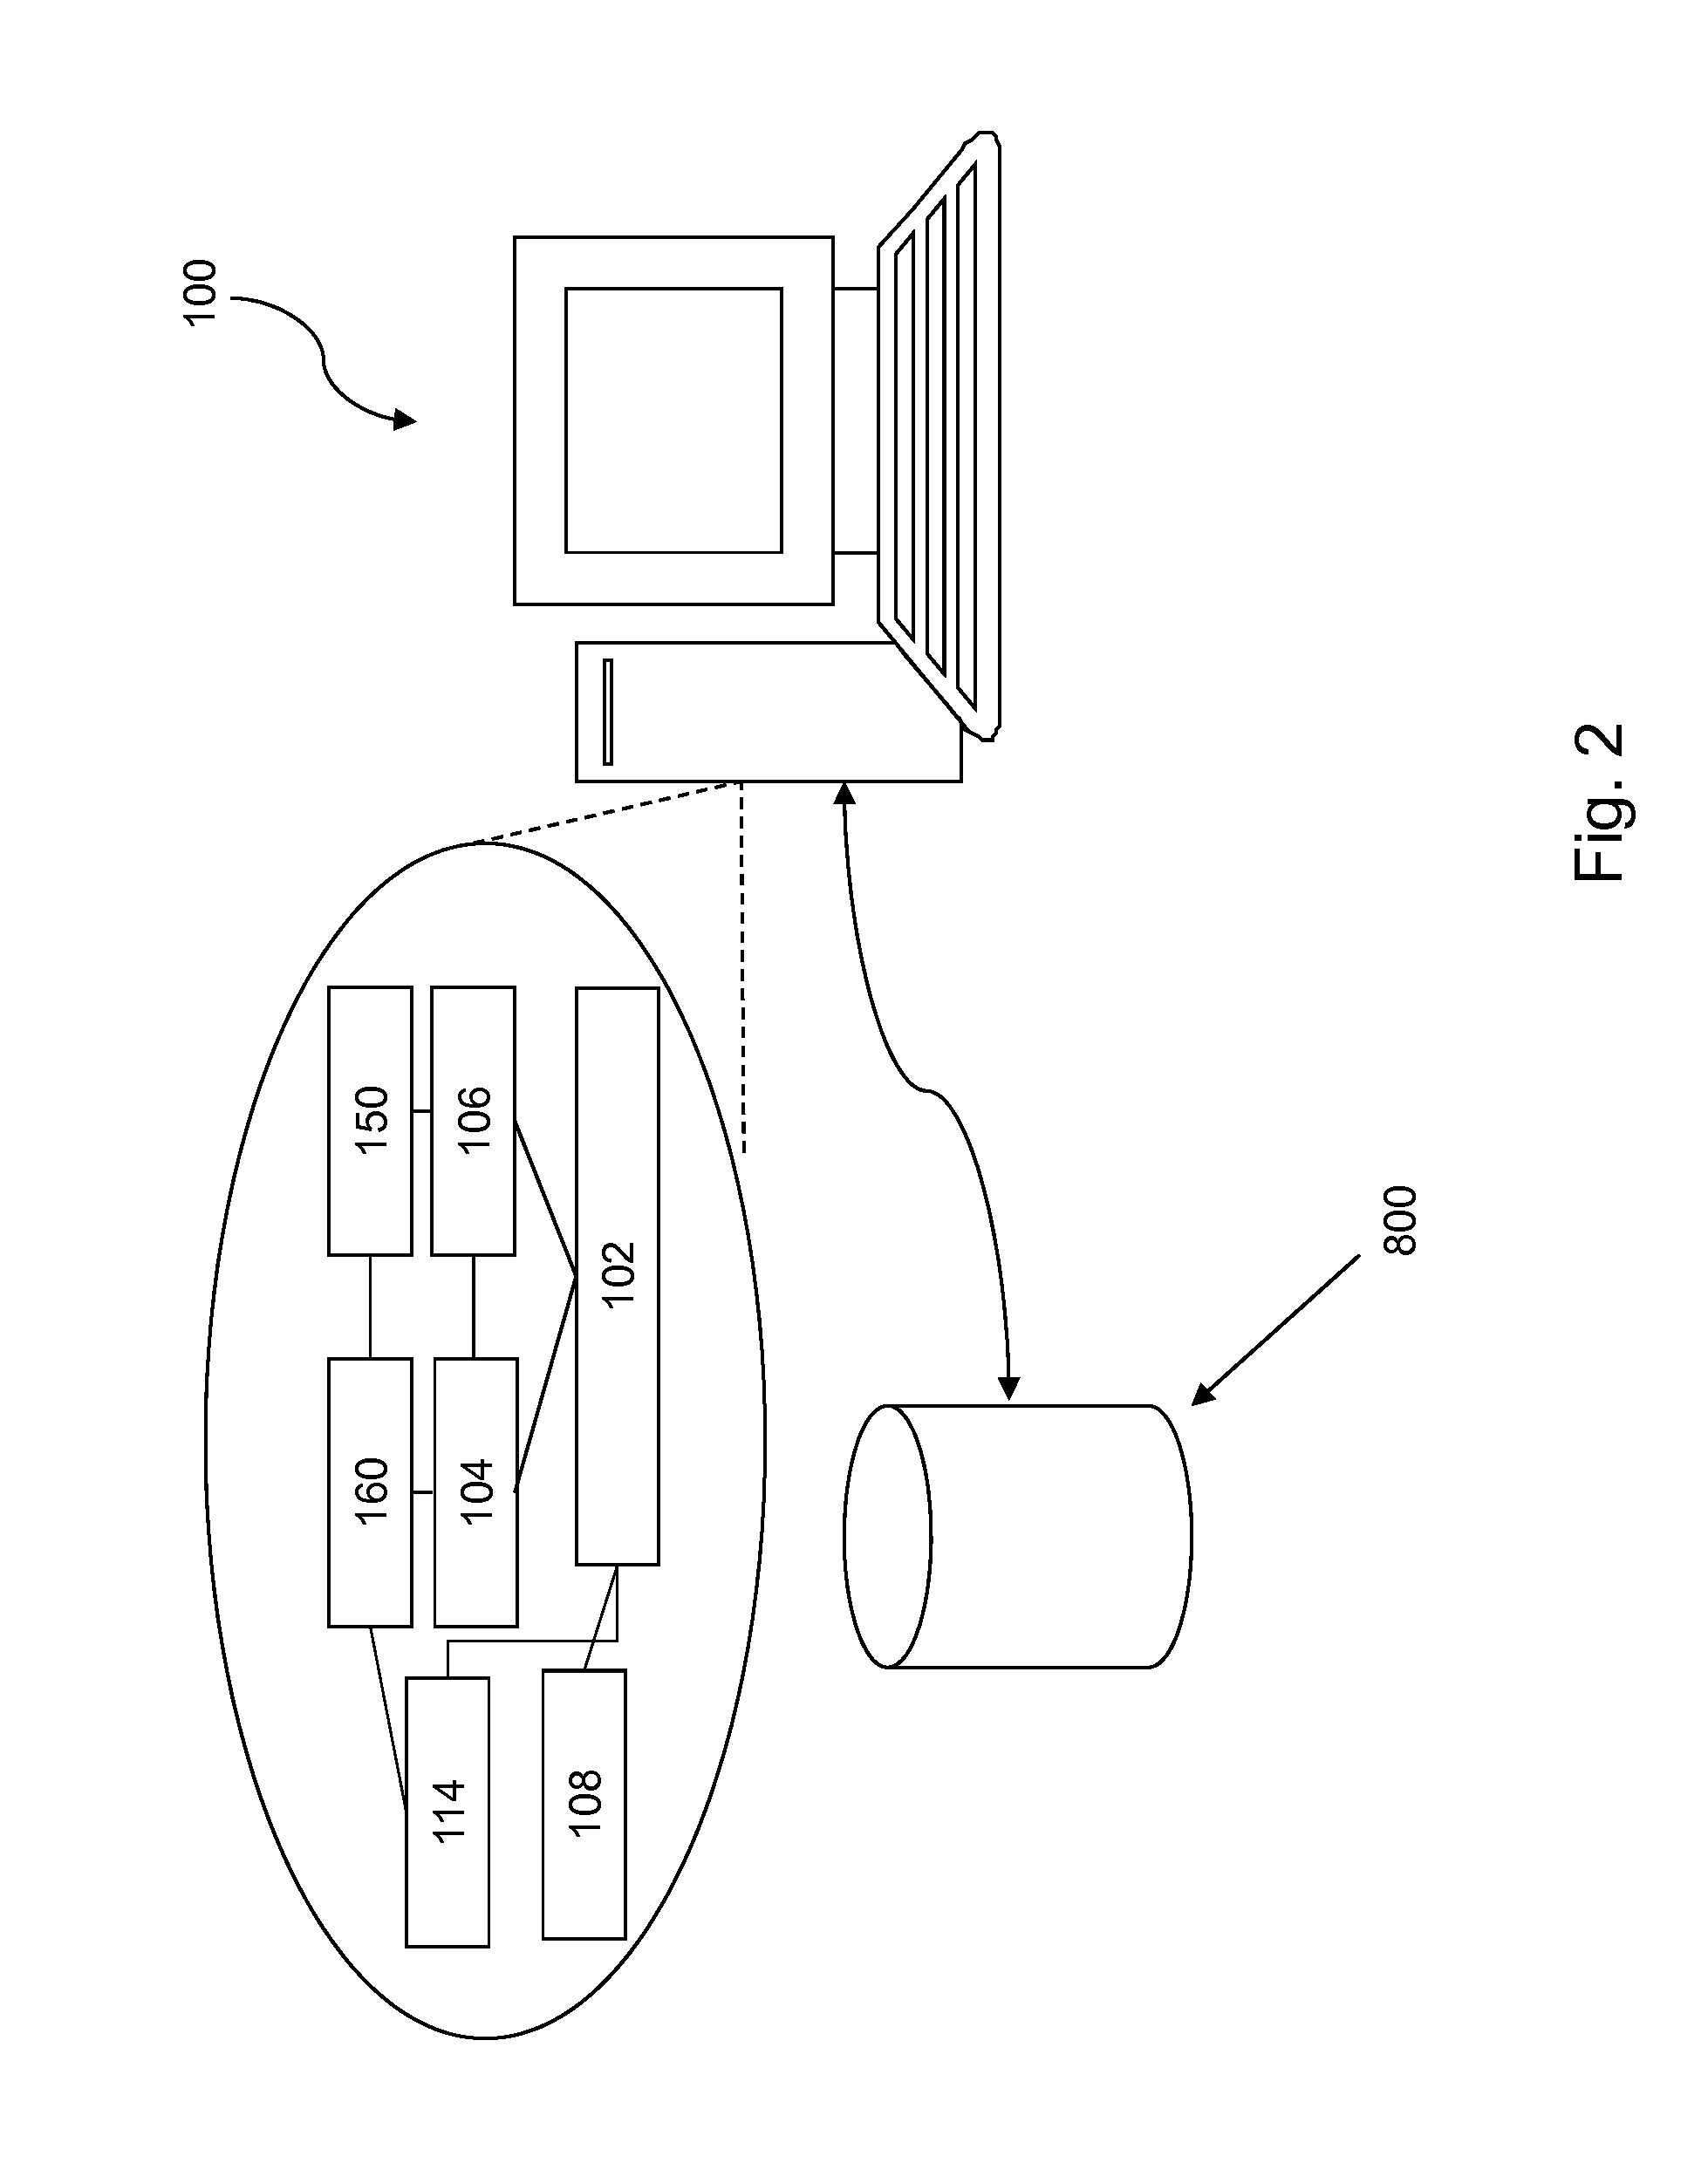 Method and apparatus for matching buyers with sellers in a marketplace to facilitate trade